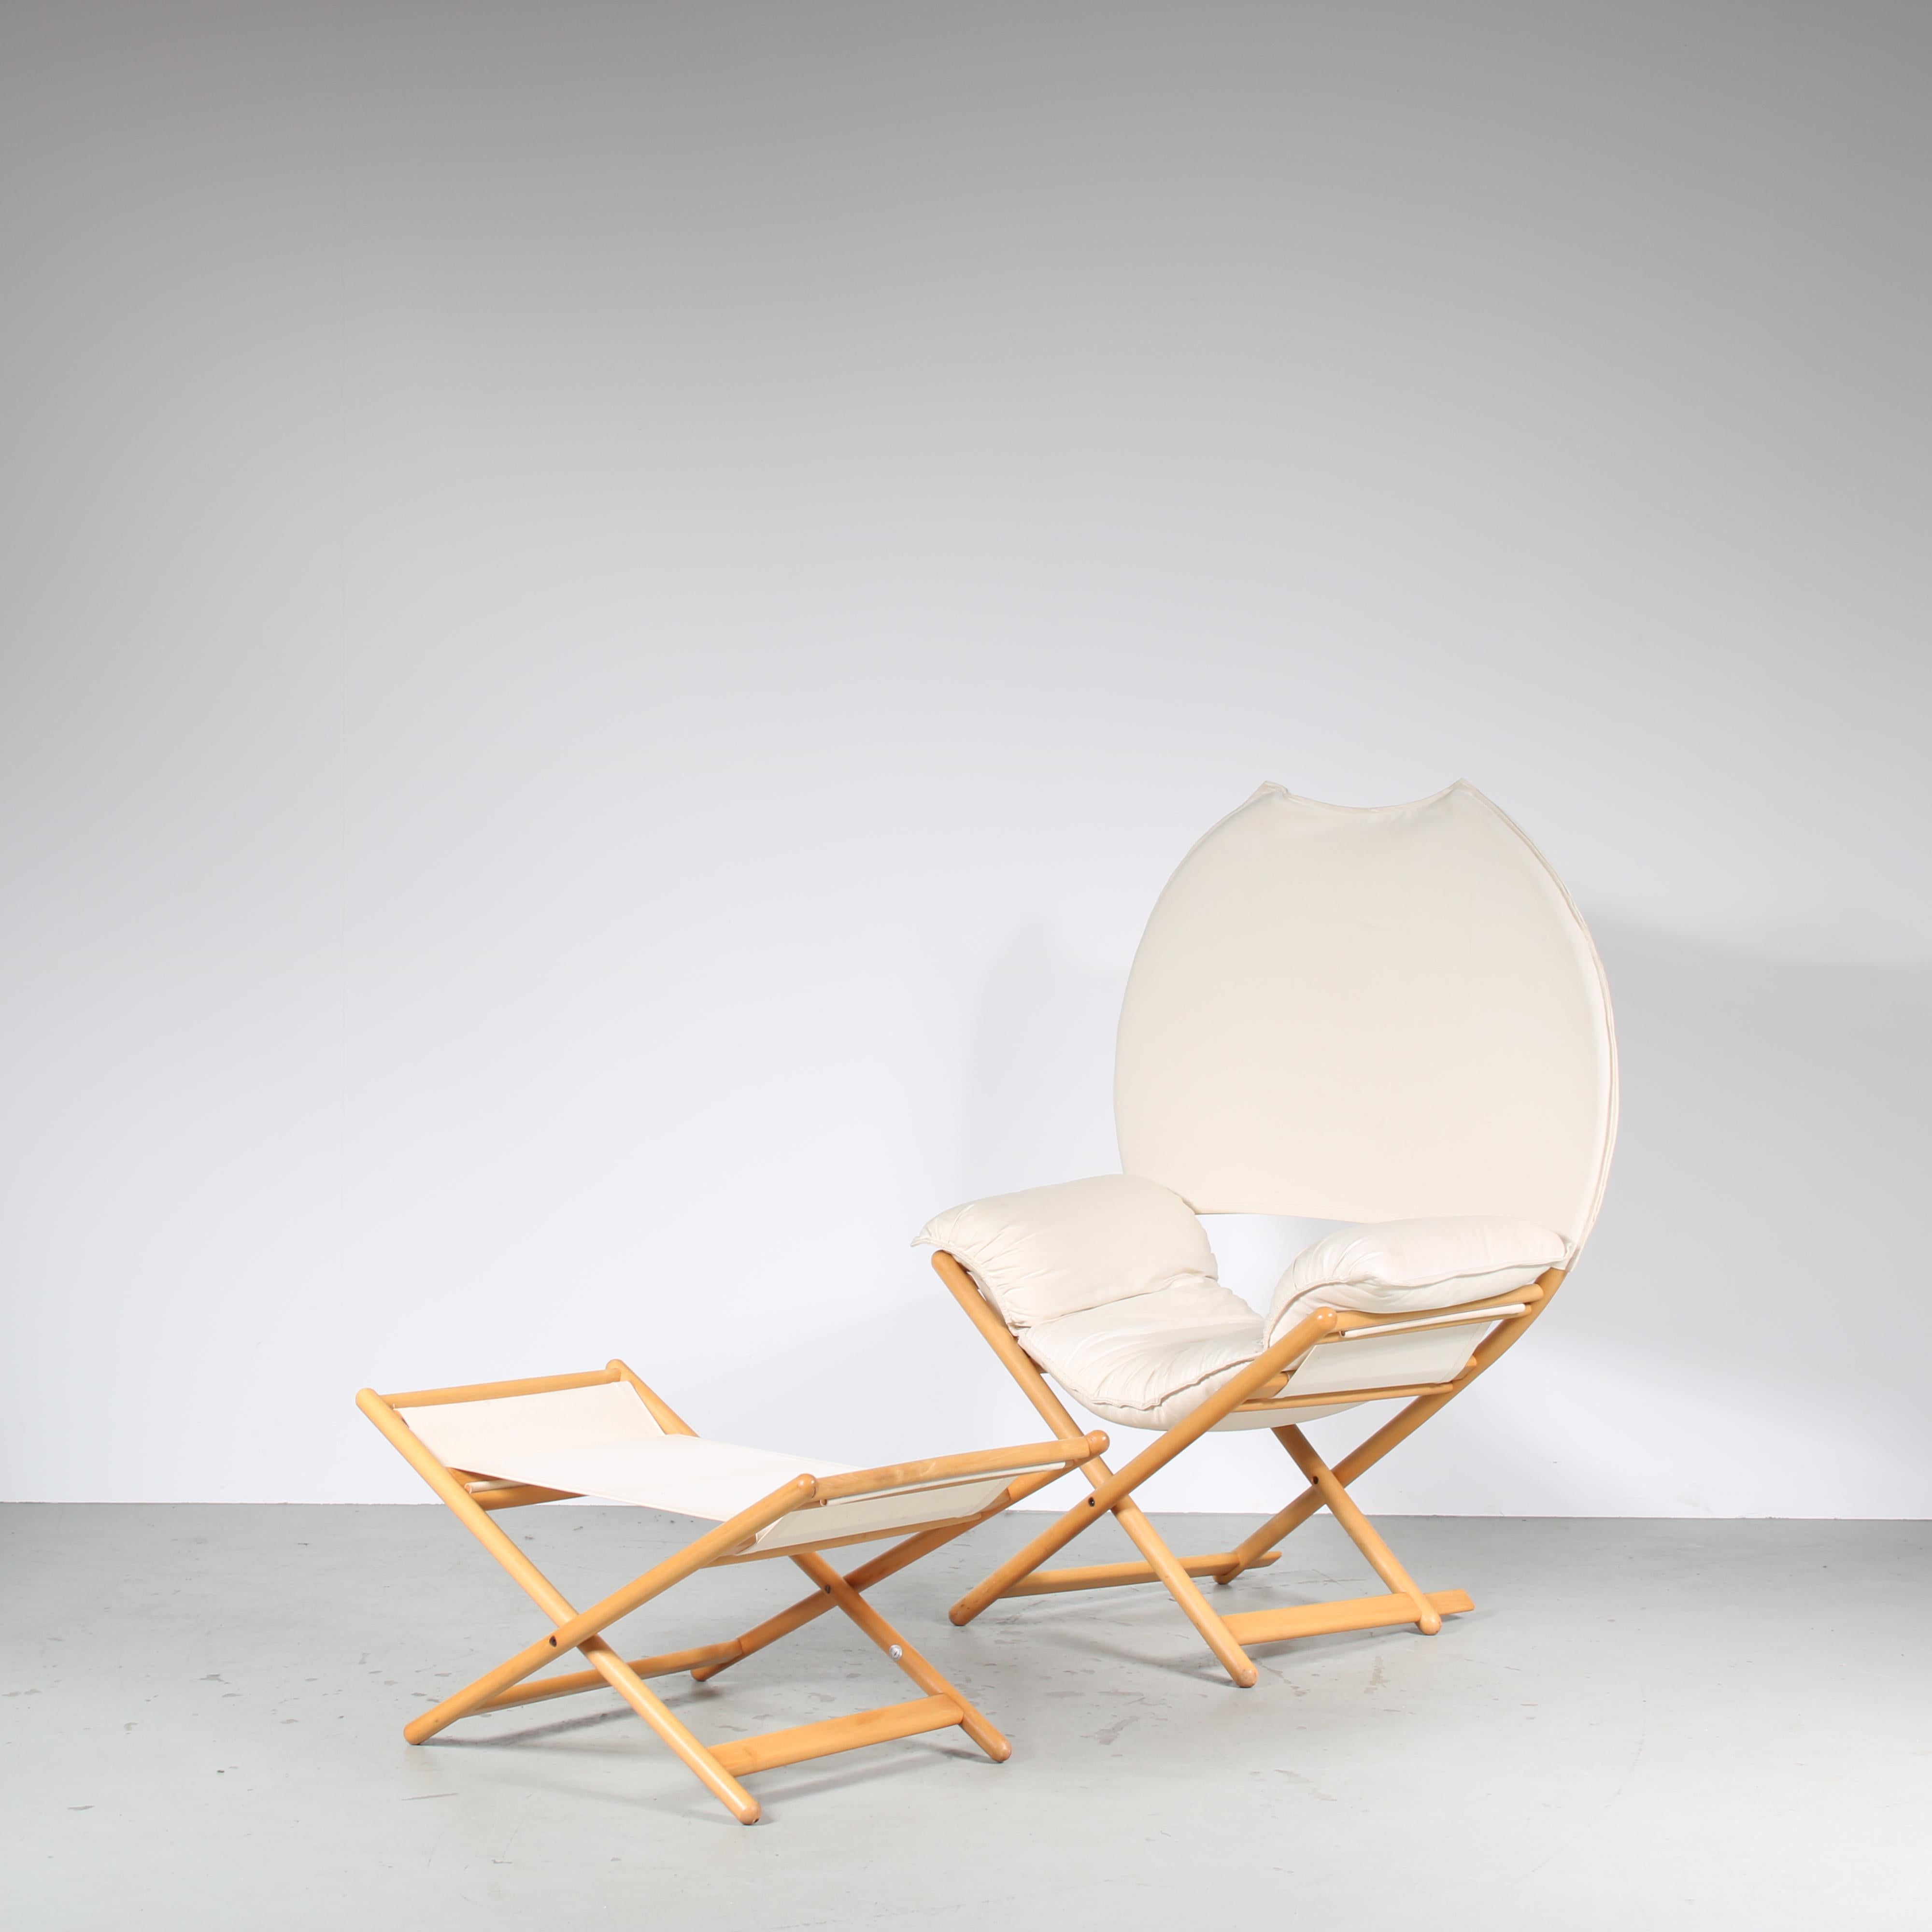 An iconic “Regina D’ Africa” (Queen of Africa) chair with matching stool designed by Vico Magistretti, manufactured by Alias in Italy around 1970.

The set contains one lounge chair and one stool, both foldable and made of high quality beech wood